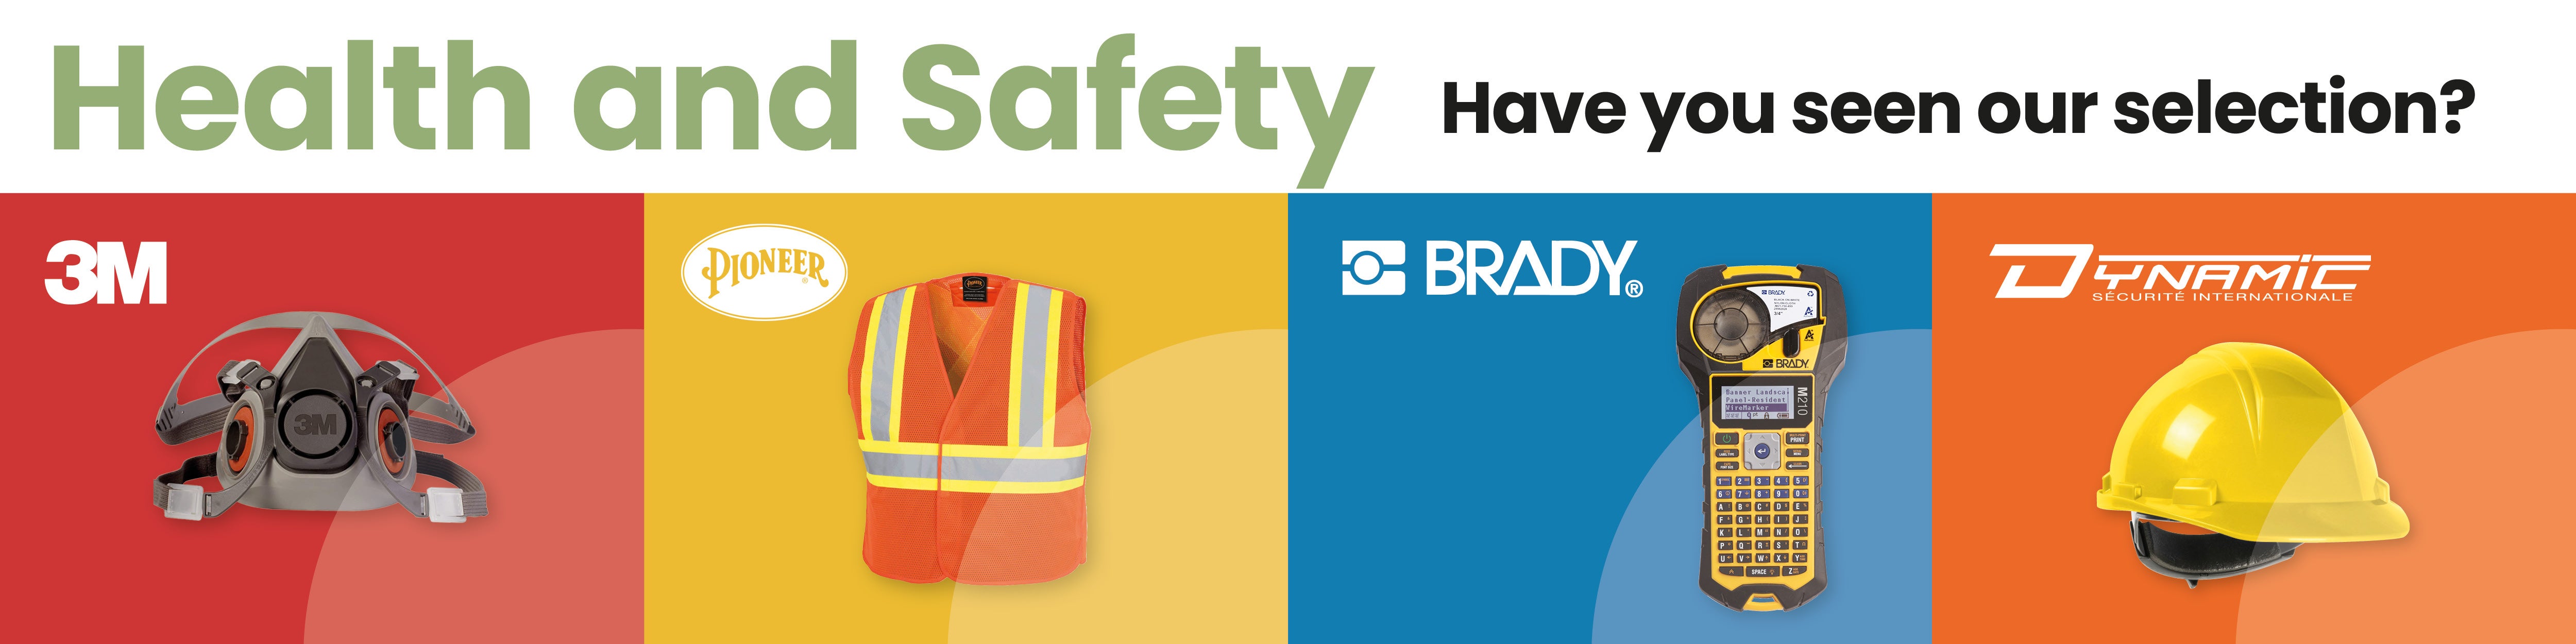 Health and safety - have you seen our selection?